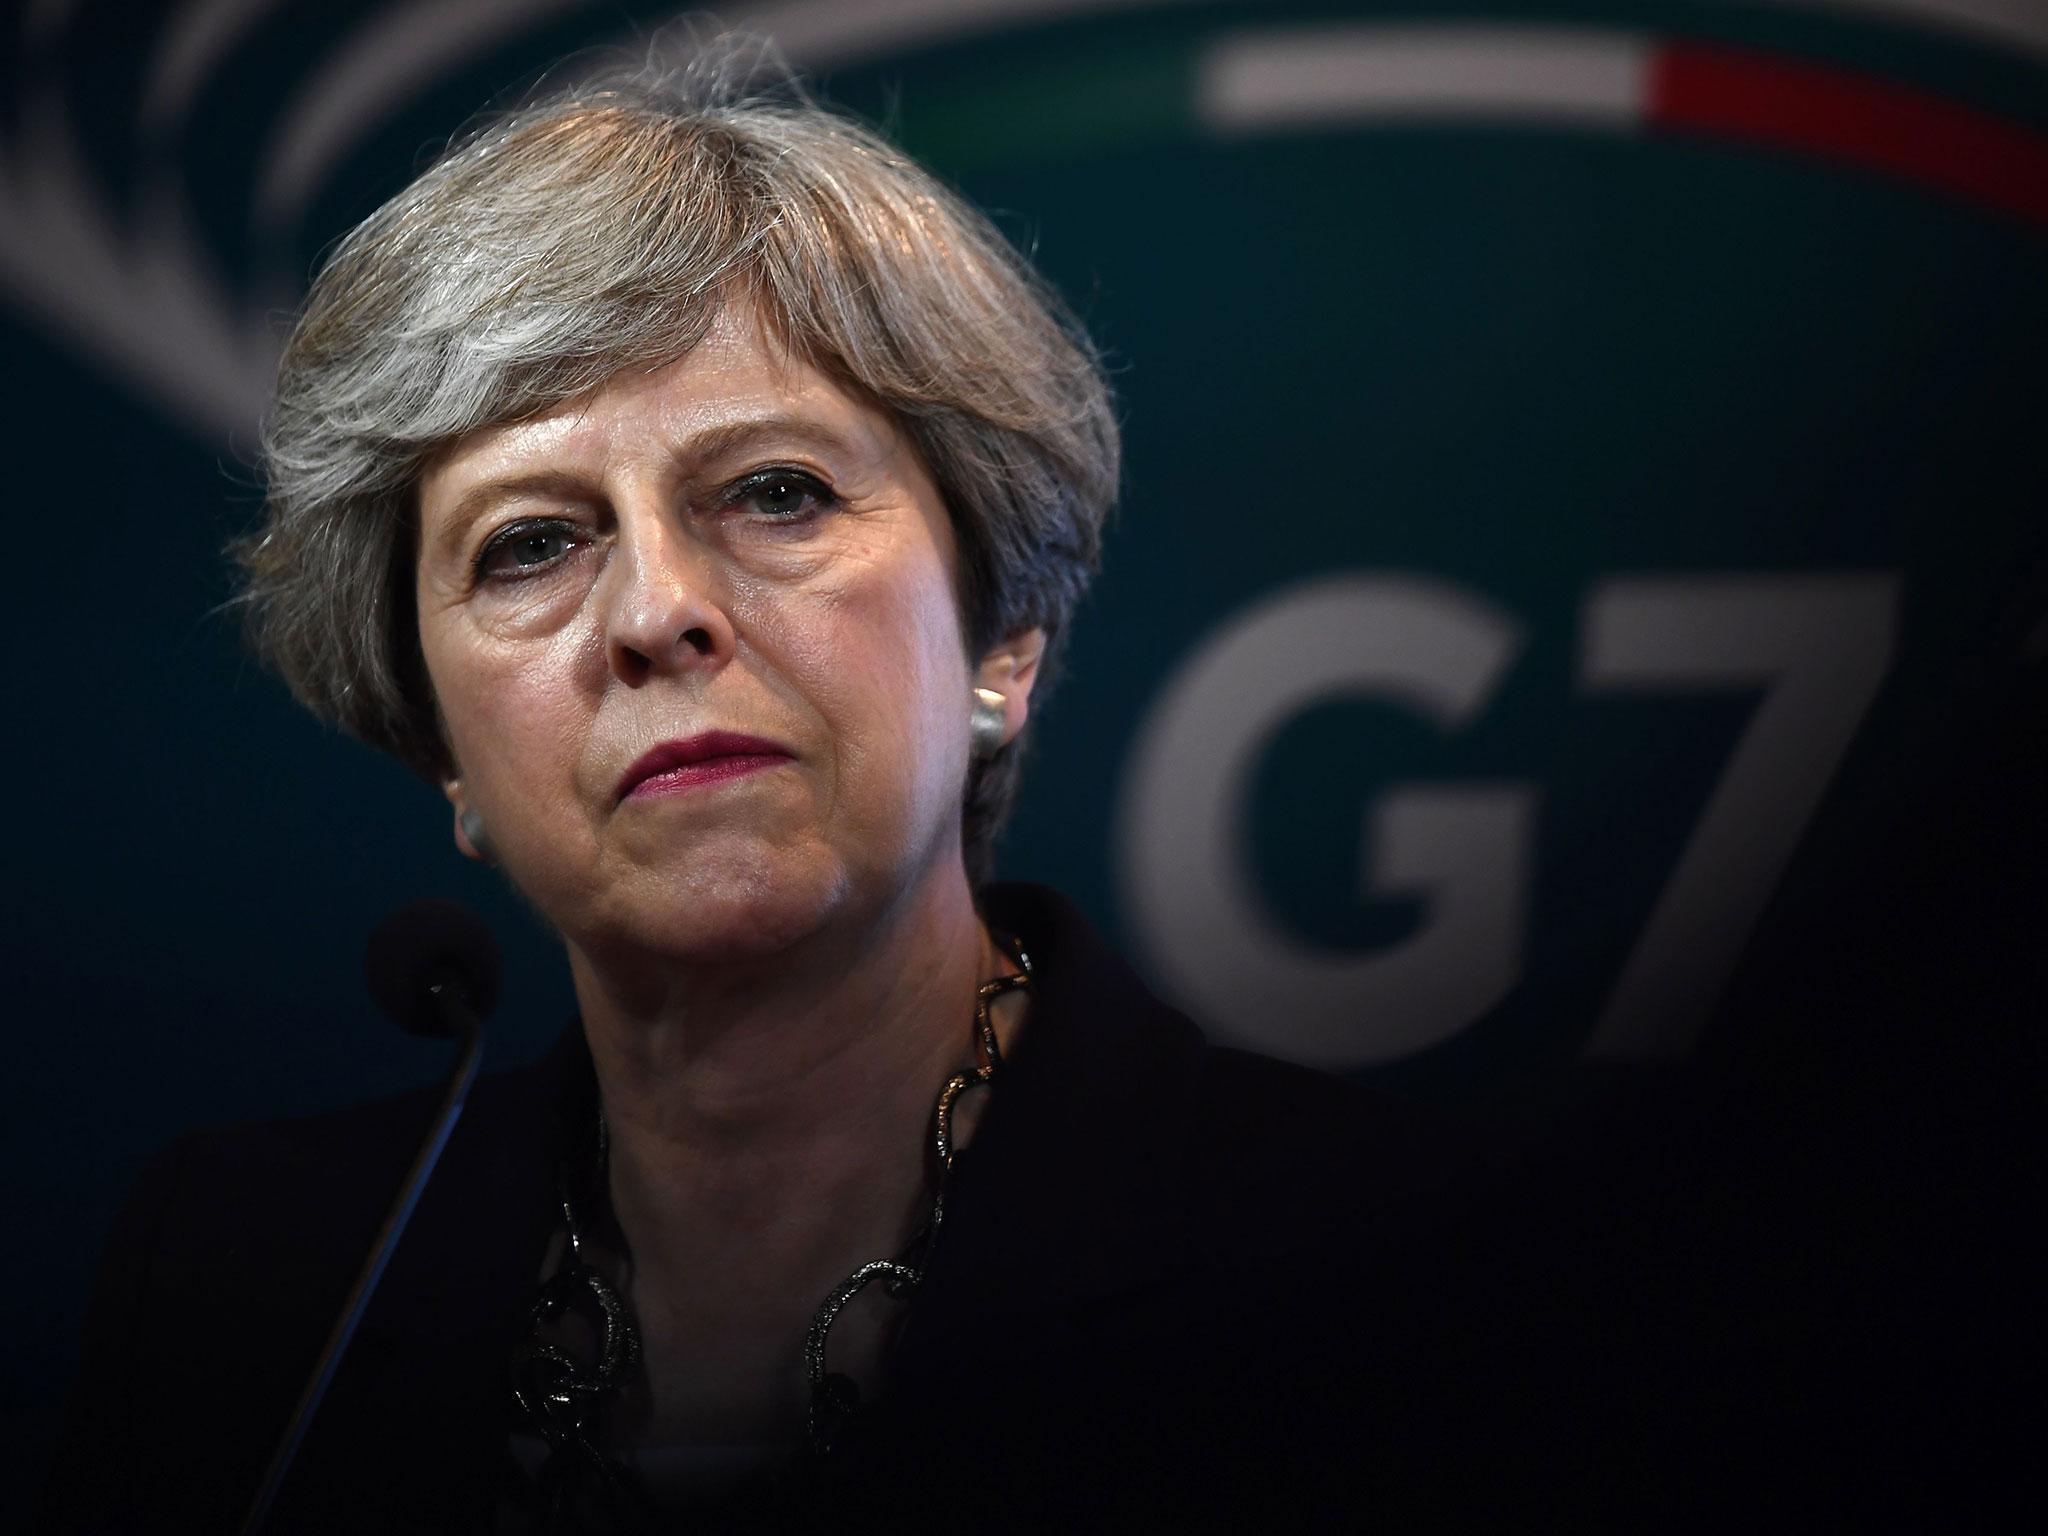 It comes as Theresa May proposed a new Commission for Countering Extremism, which will have a remit to clamp down on 'unacceptable cultural norms' such as female genital mutilation